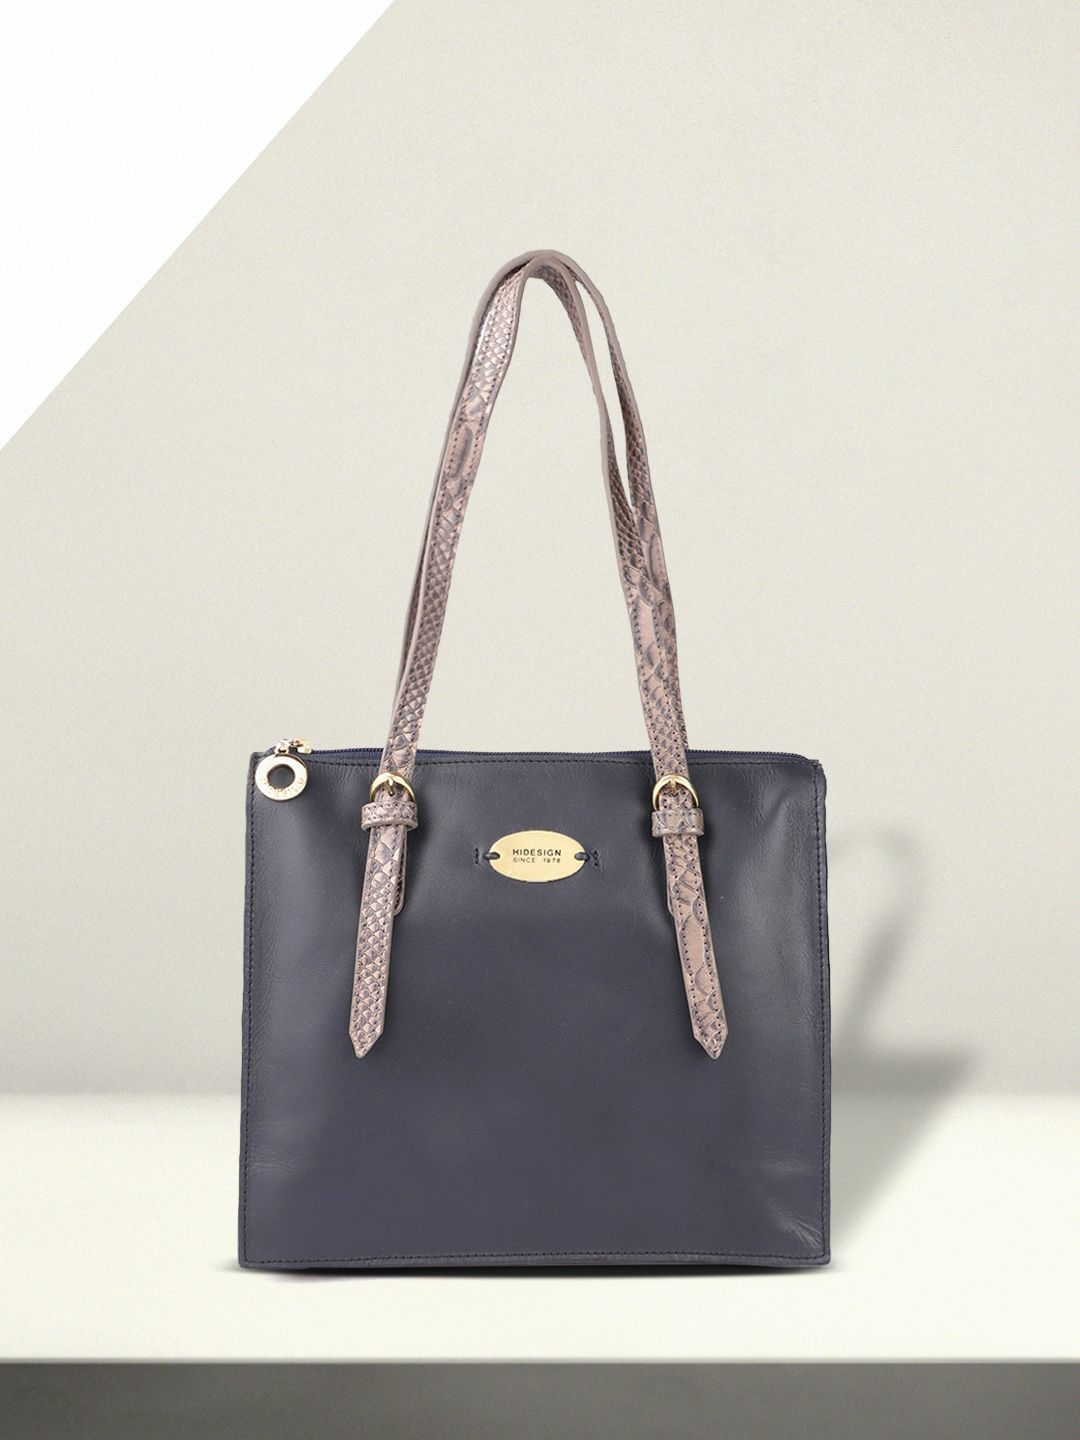 Hidesign Navy Blue & Beige Handcrafted Leather Structured Shoulder Bag Price in India